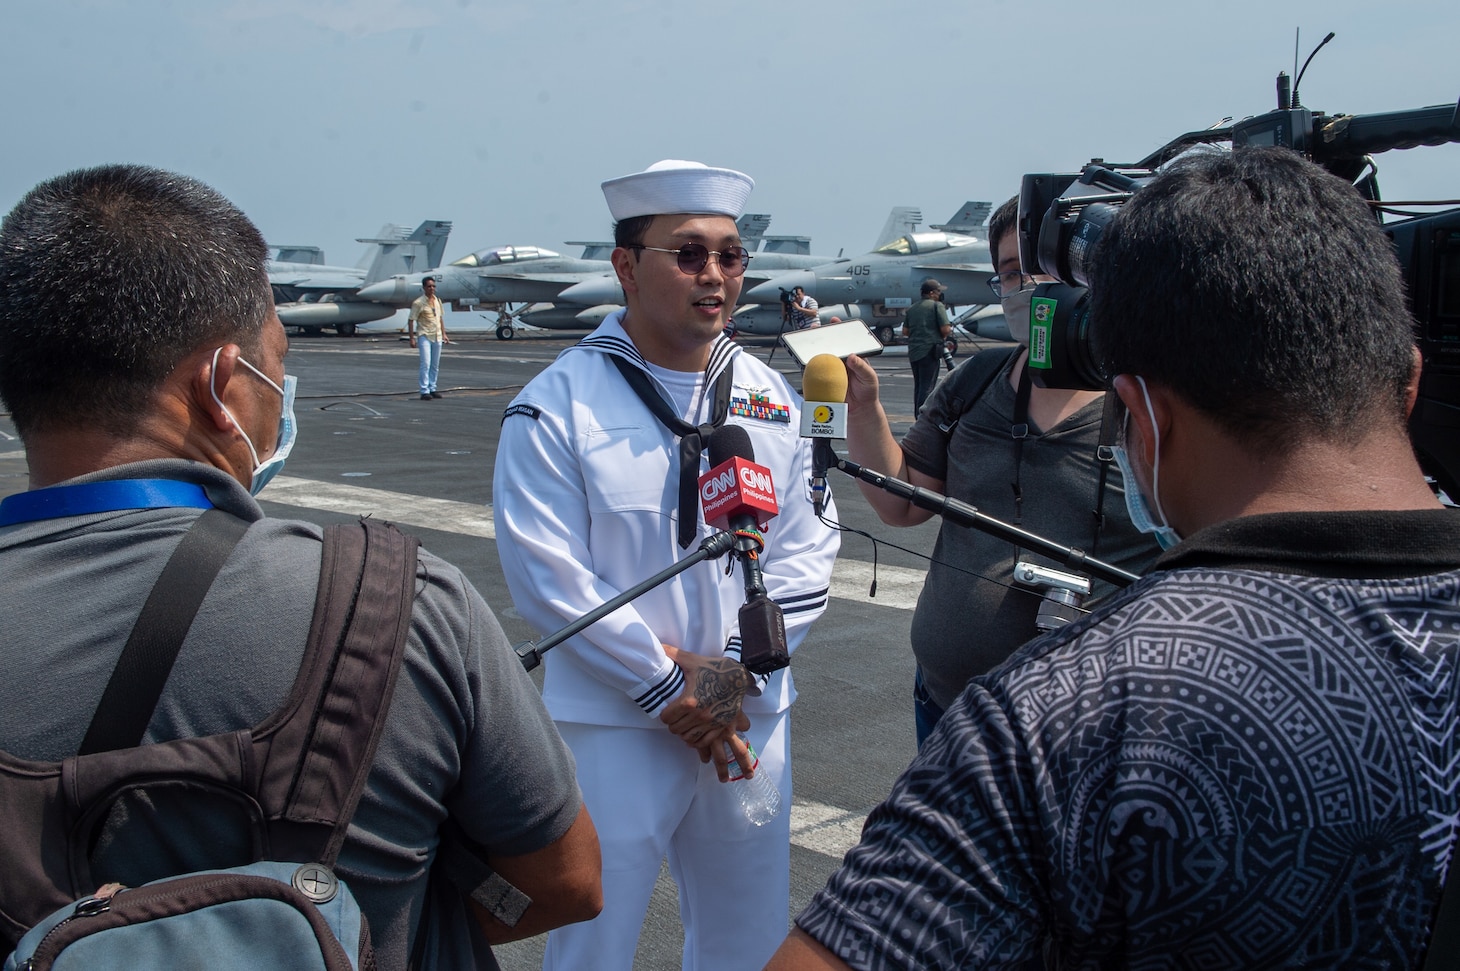 221014-N-IG750-1082 MANILA BAY (Oct. 14, 2022) Personnel Specialist Second Class Brandon Romero, from Jacksonville, Florida, answers interview questions from local media outlets on the flight deck of the U.S. Navy’s only forward-deployed aircraft carrier, USS Ronald Reagan (CVN 76), while at anchor in Manila Bay, Philippines, Oct. 14. Ronald Reagan, the flagship of Carrier Strike Group 5 provides a combat-ready force that protects and defends the United States, and supports alliances, partnerships and collective maritime interests in the Indo-Pacific region. (U.S. Navy photo by Mass Communication Specialist 2nd Class Caleb Dyal)